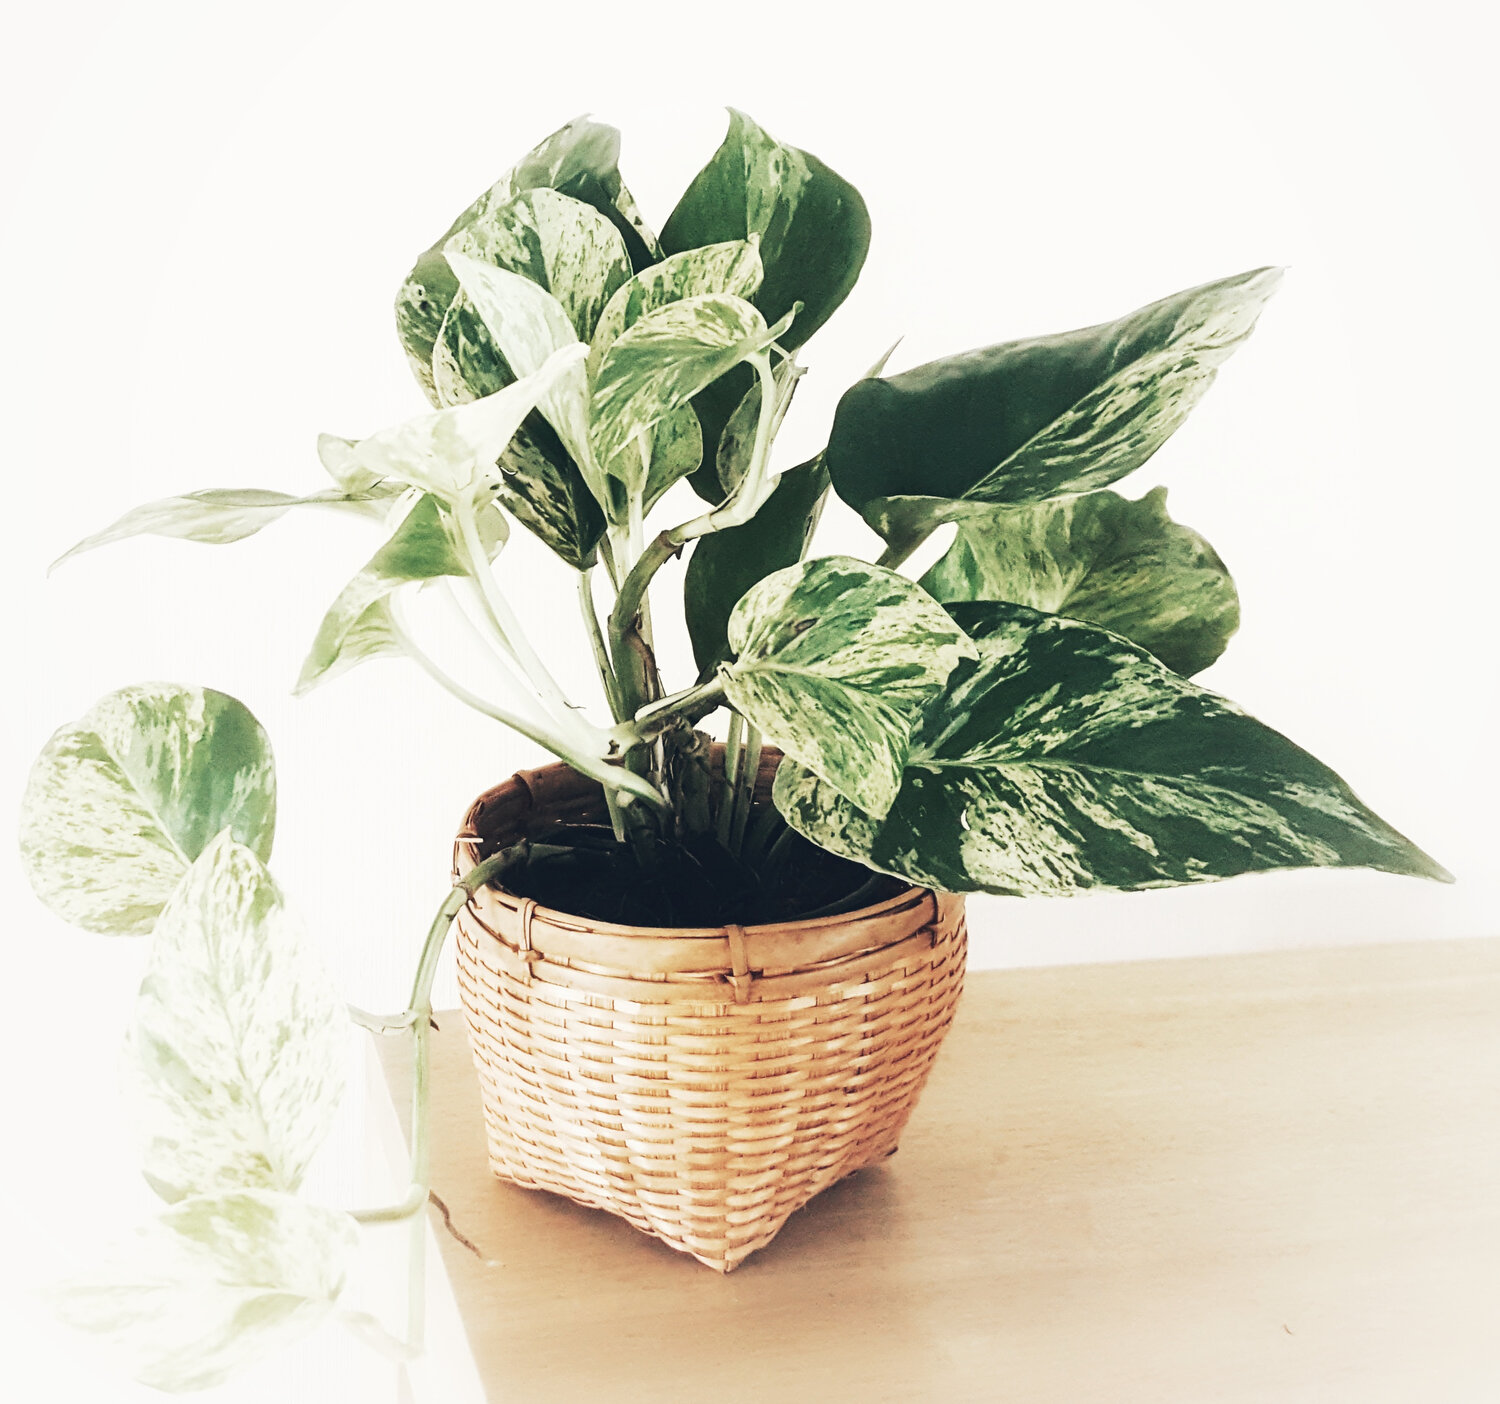 How to Water Pothos Plants